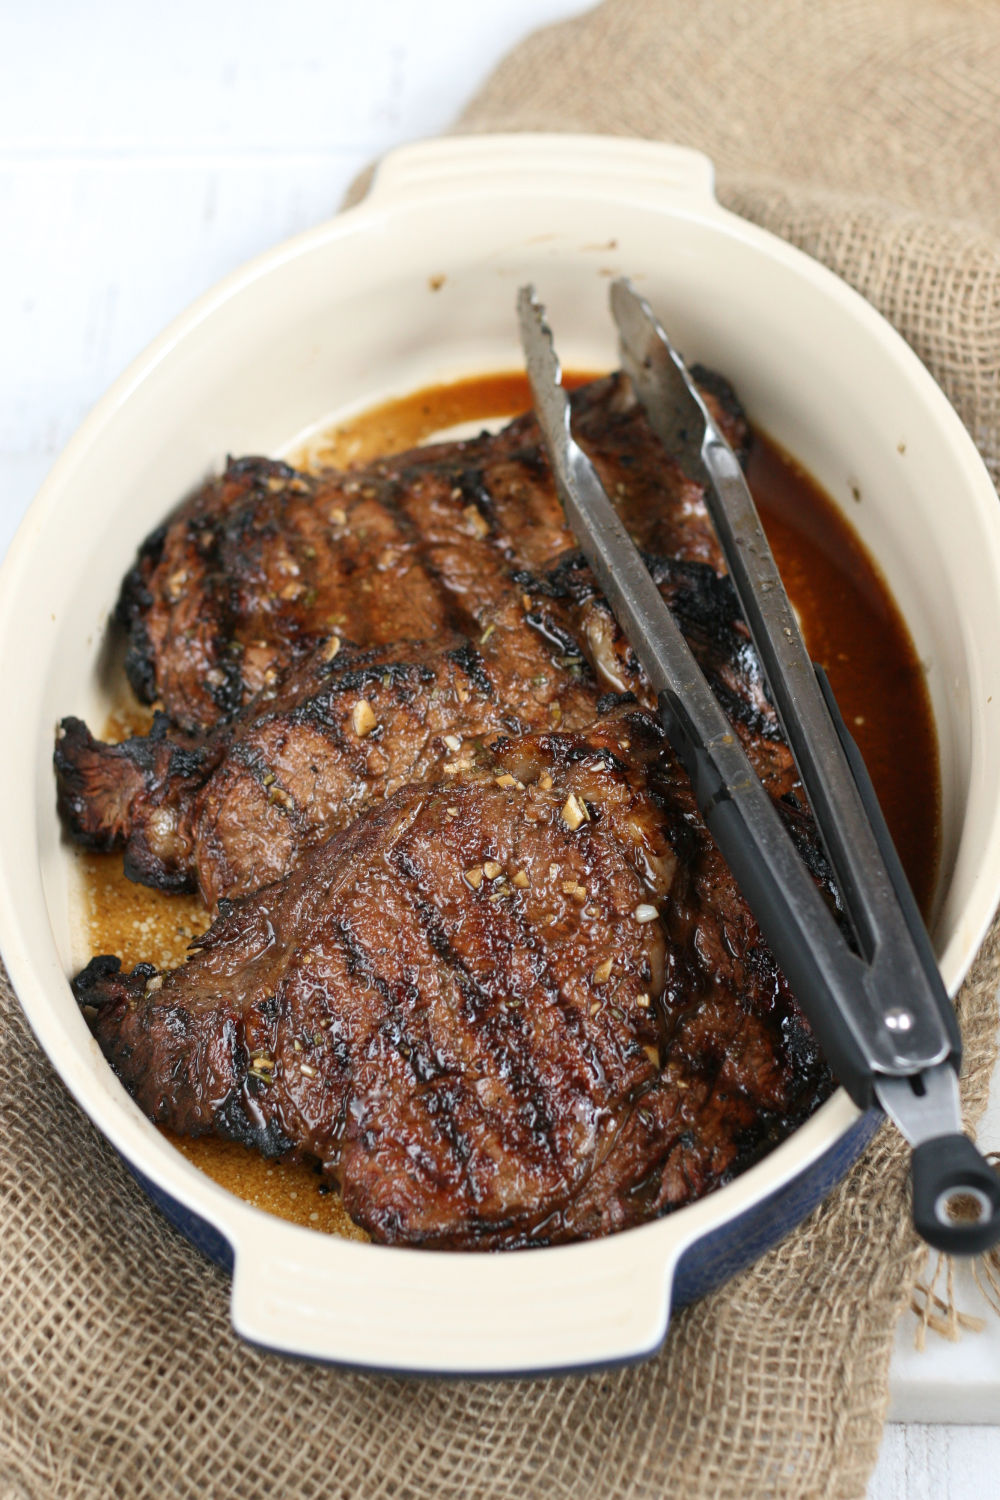 grilled steak in ceramic baking dish with long tongs.